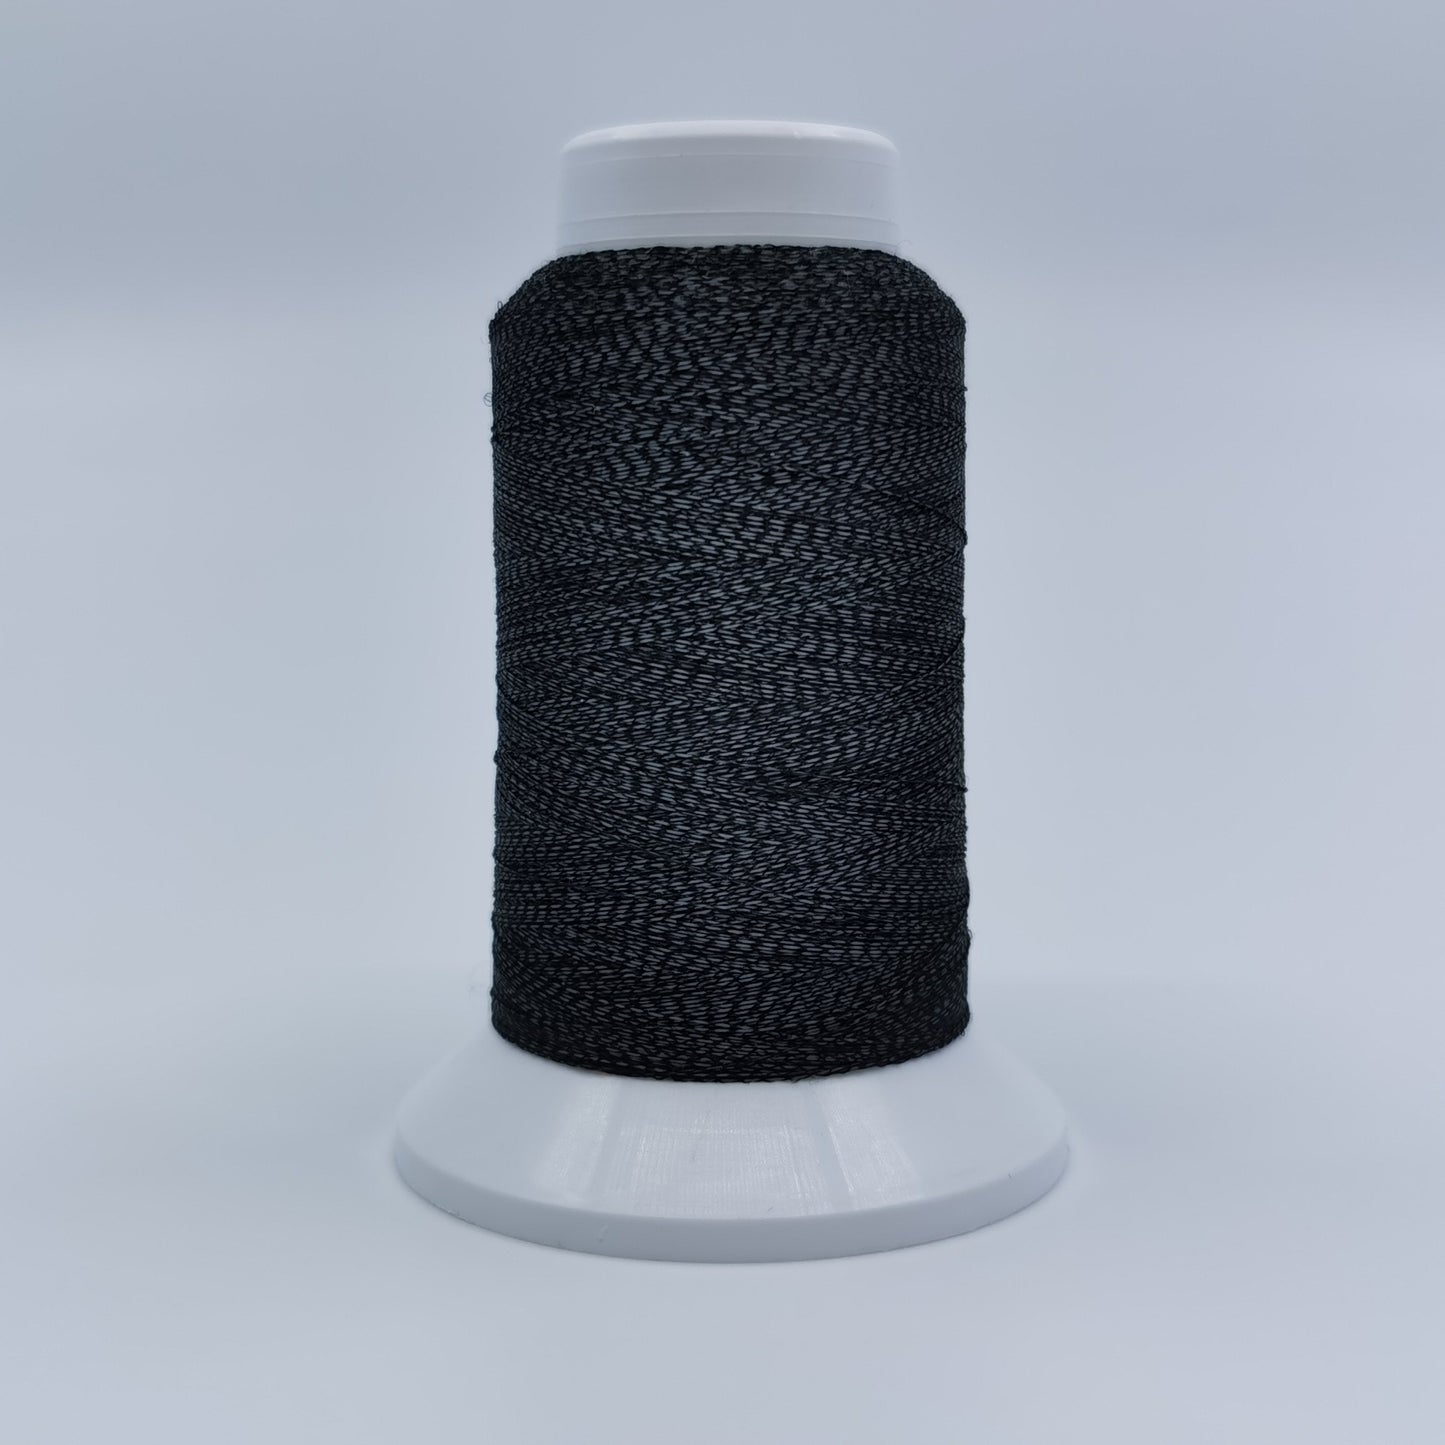 Reflective fabric sewing thread black color